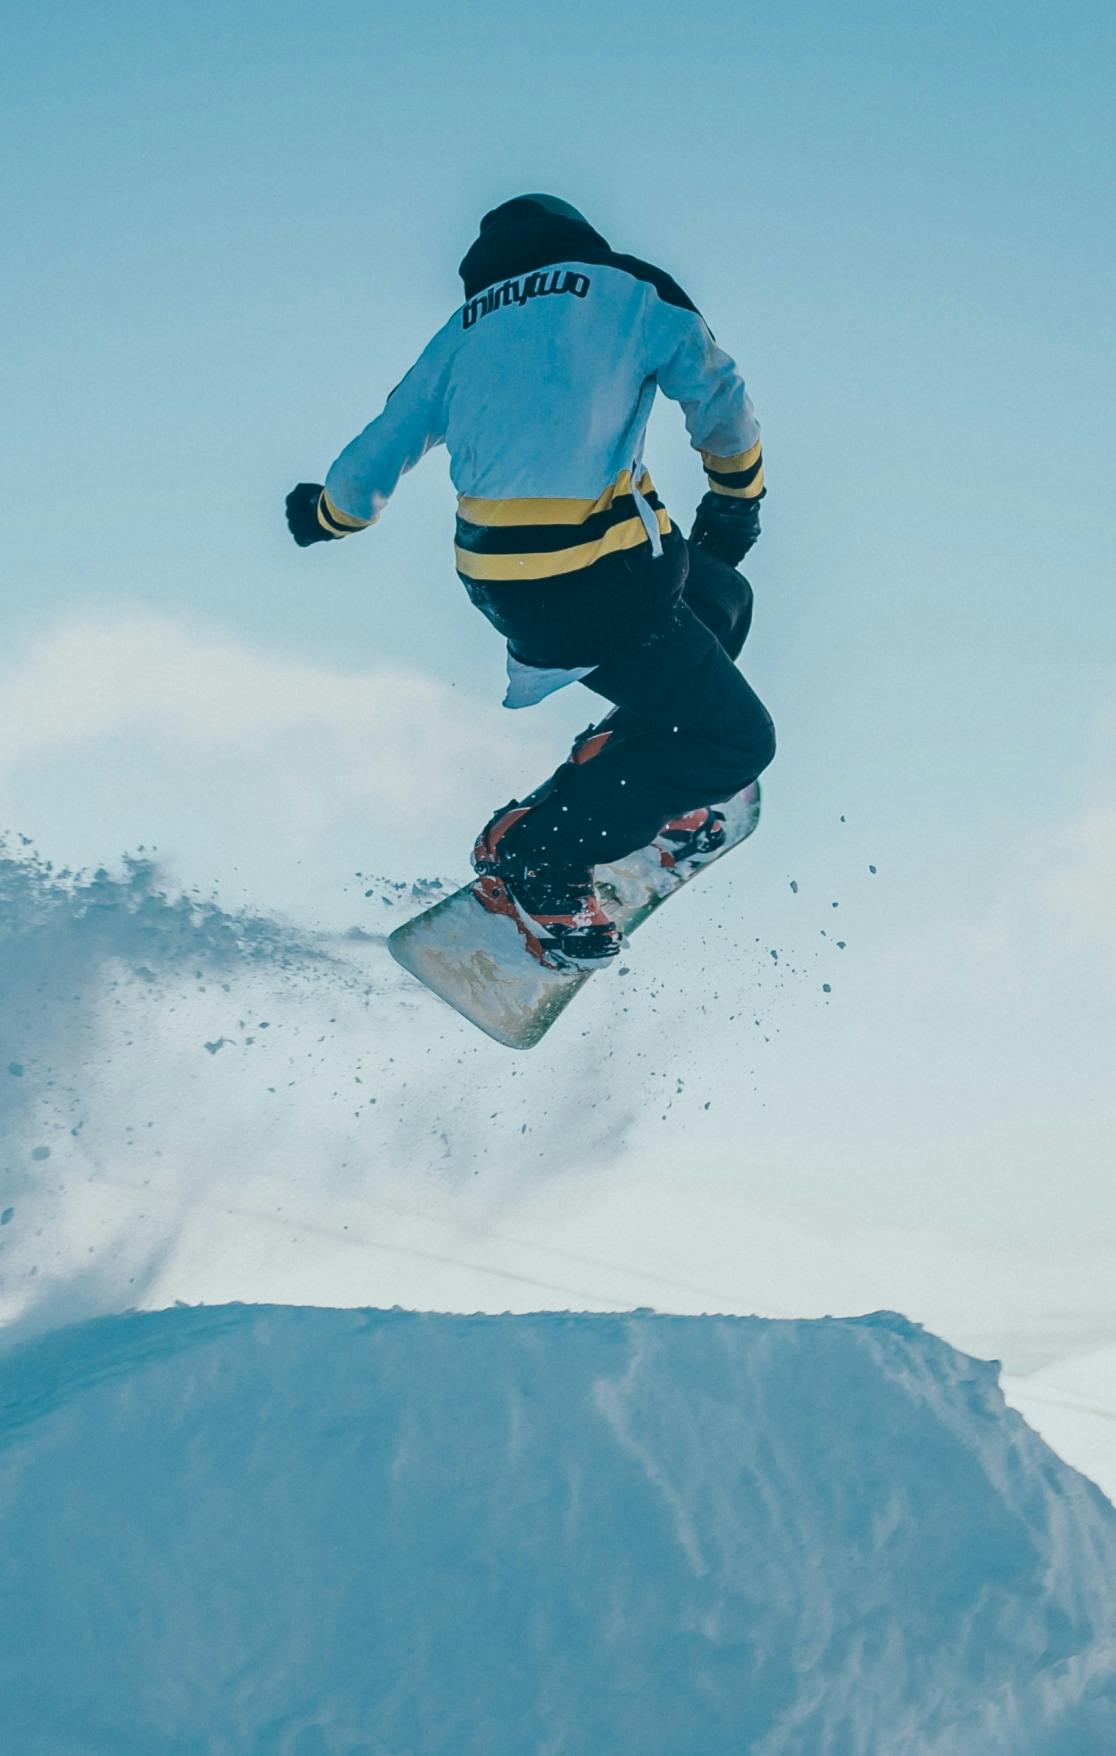 a snowboarder doing a trick photographed mid air